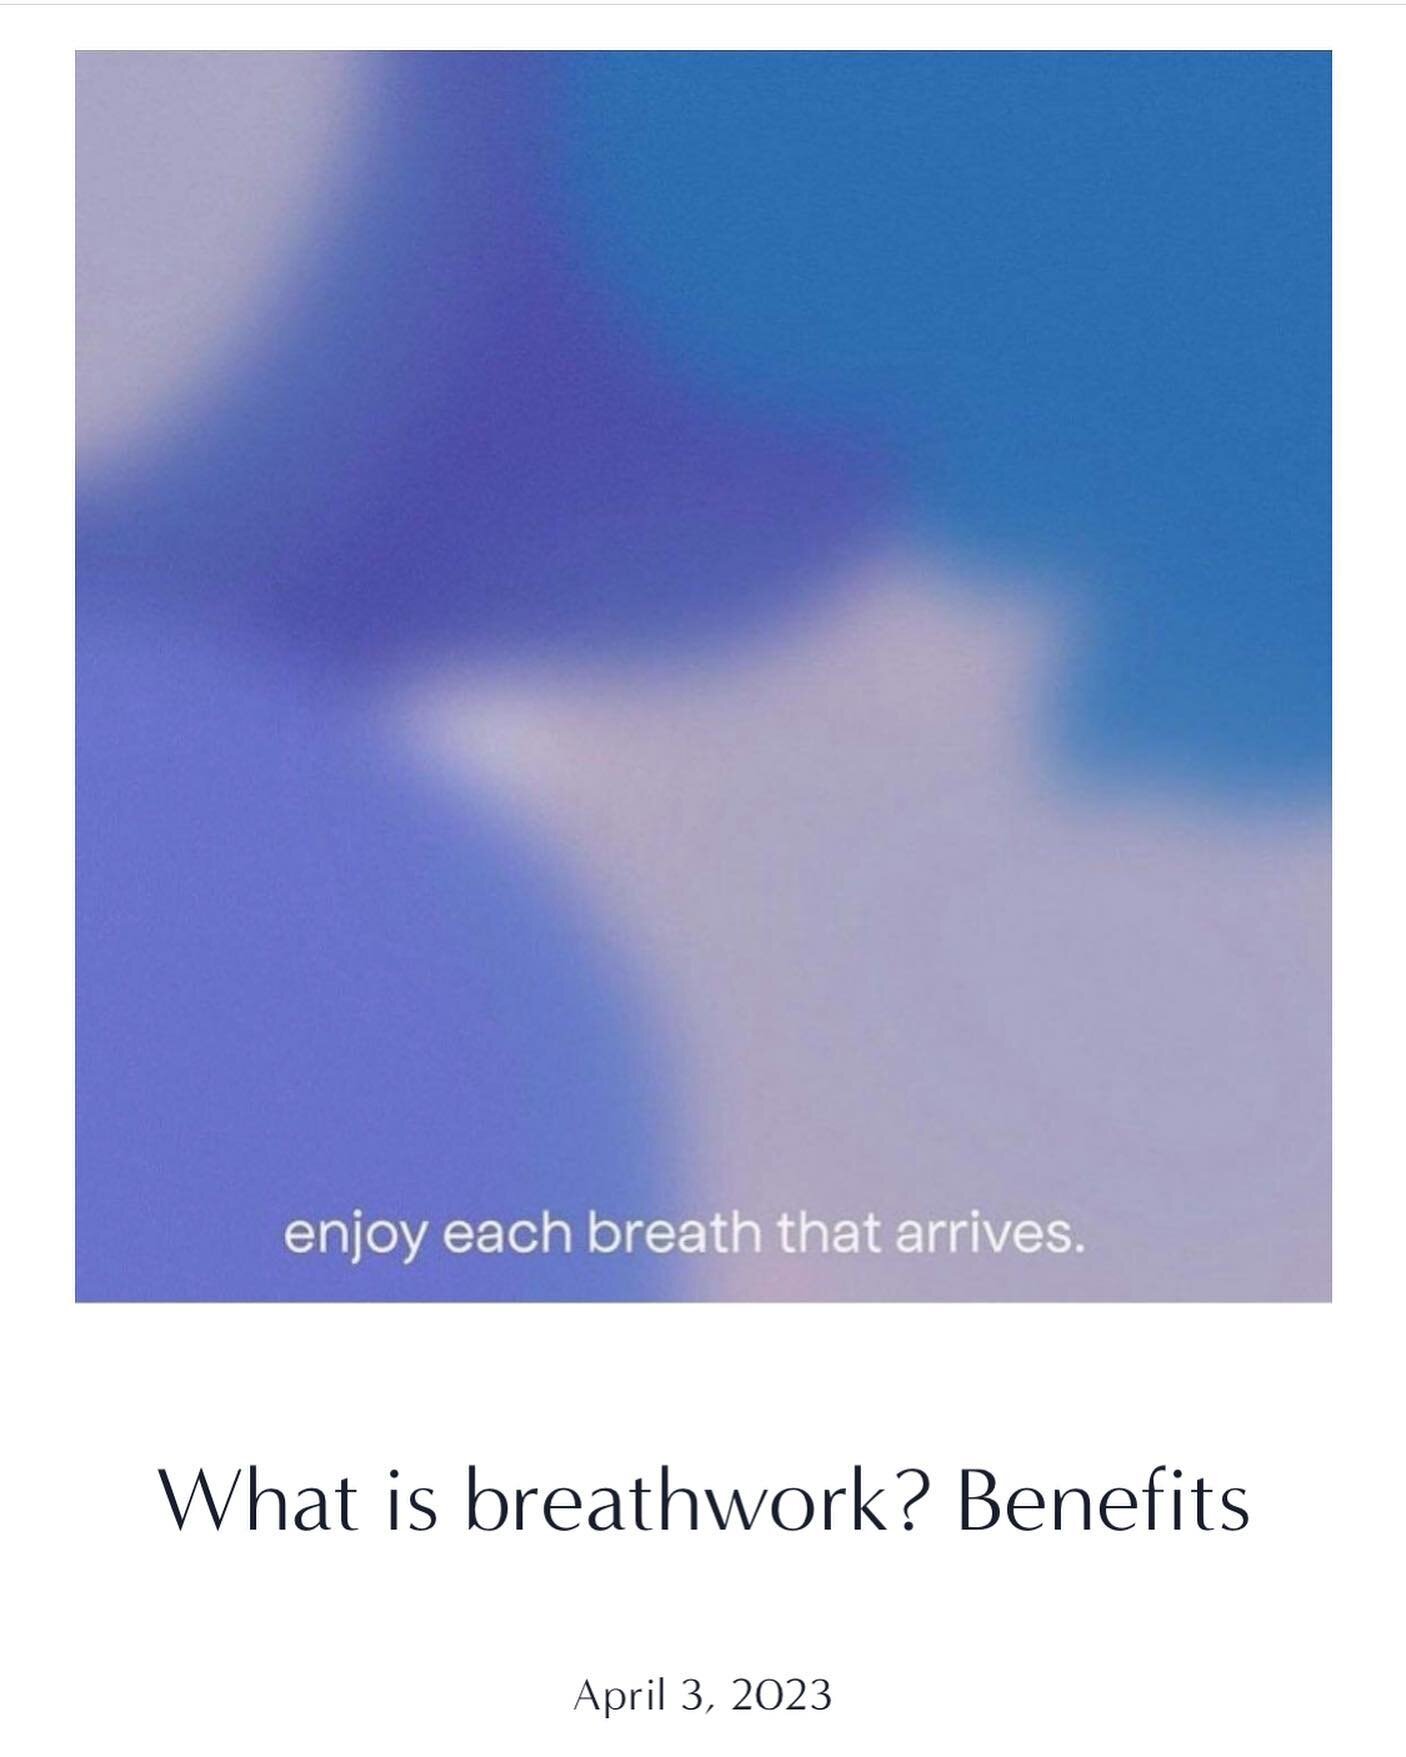 &ldquo;YOUR BREATH IS THE MOST UNDERRATED ASPECT OF HEALTH AND WE ALL HAVE THE ABILITY TO ACCESS IT&hellip;&rdquo; ~ Rory Warnock 

Happy April, New blog post just went live on my wellness blog 🤍
What is breathwork? &amp; Benefits&hellip;
~ link in 